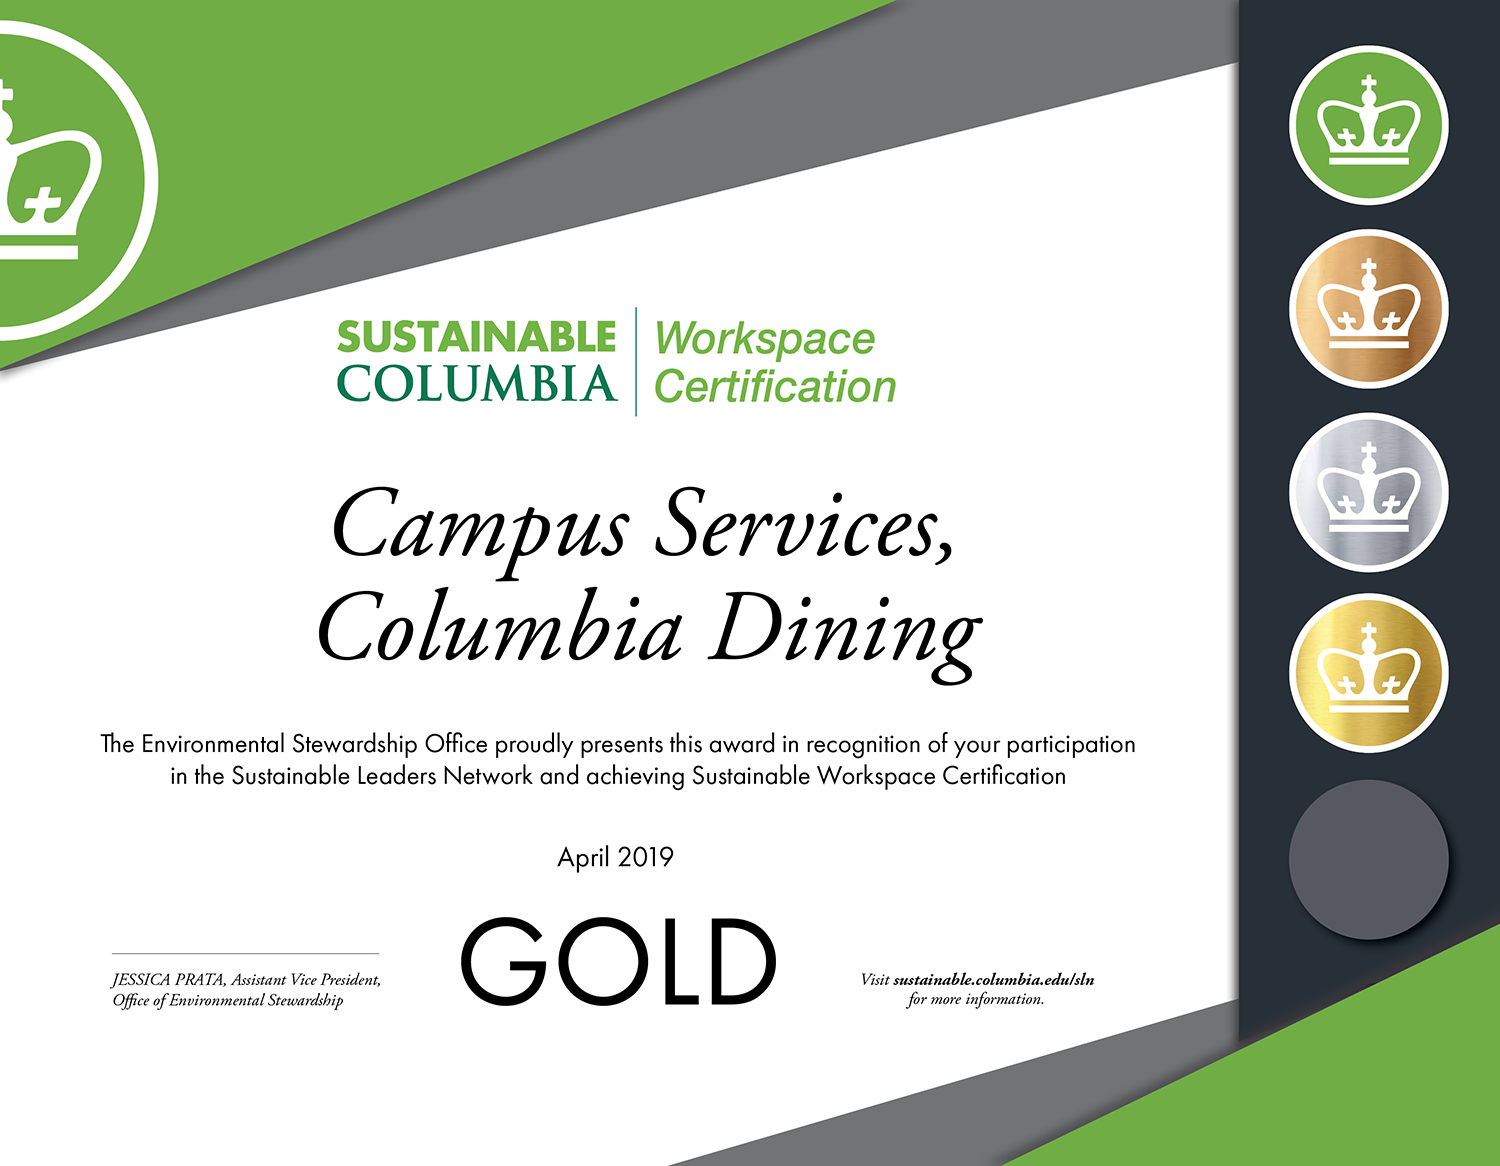 Workspace Certification Gold awarded to Columbia Dining in April 2019